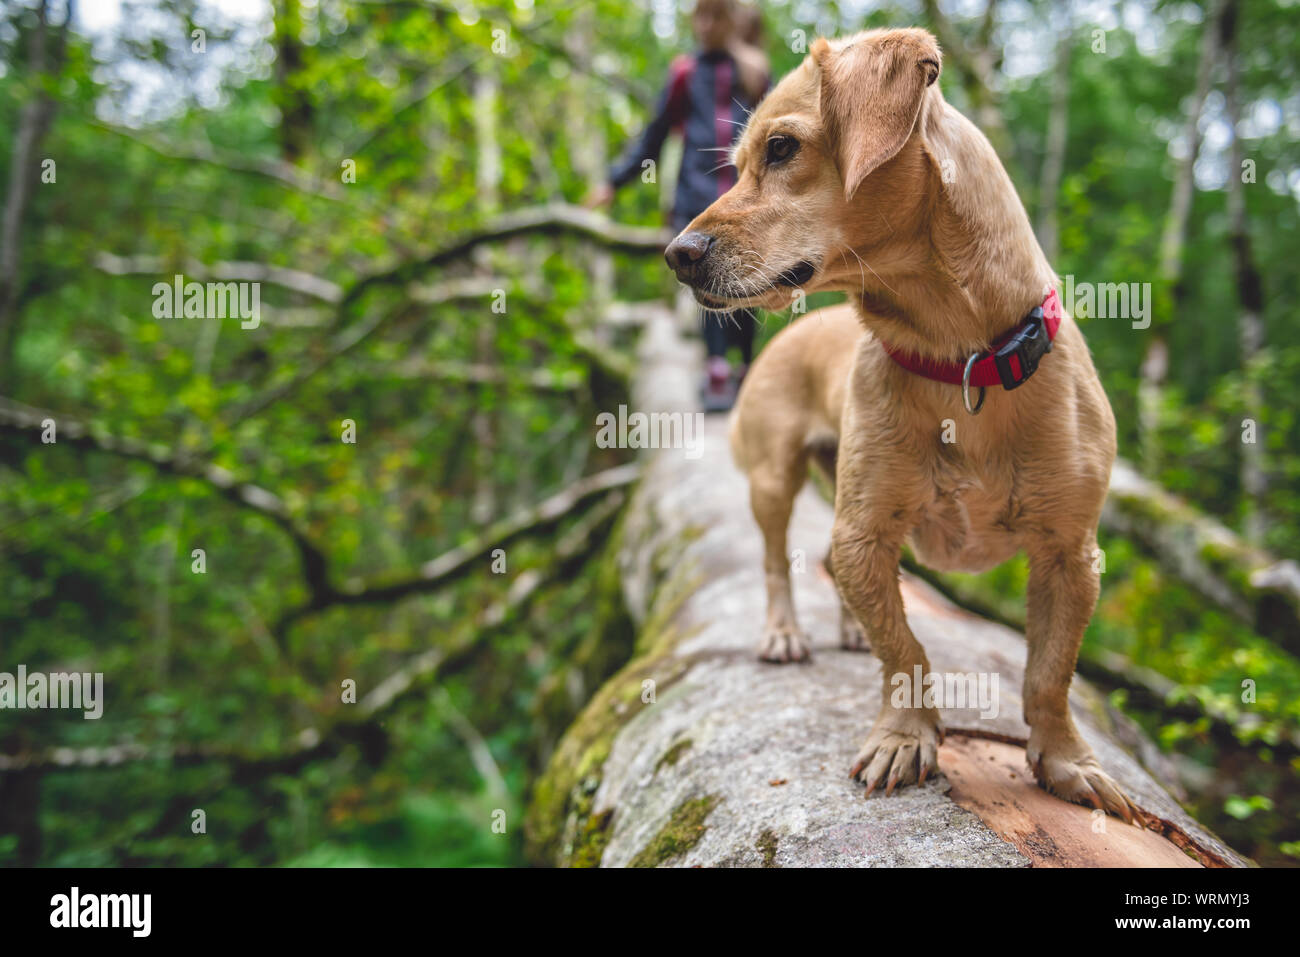 Dog with little girl standing on a tree log in the forest Stock Photo